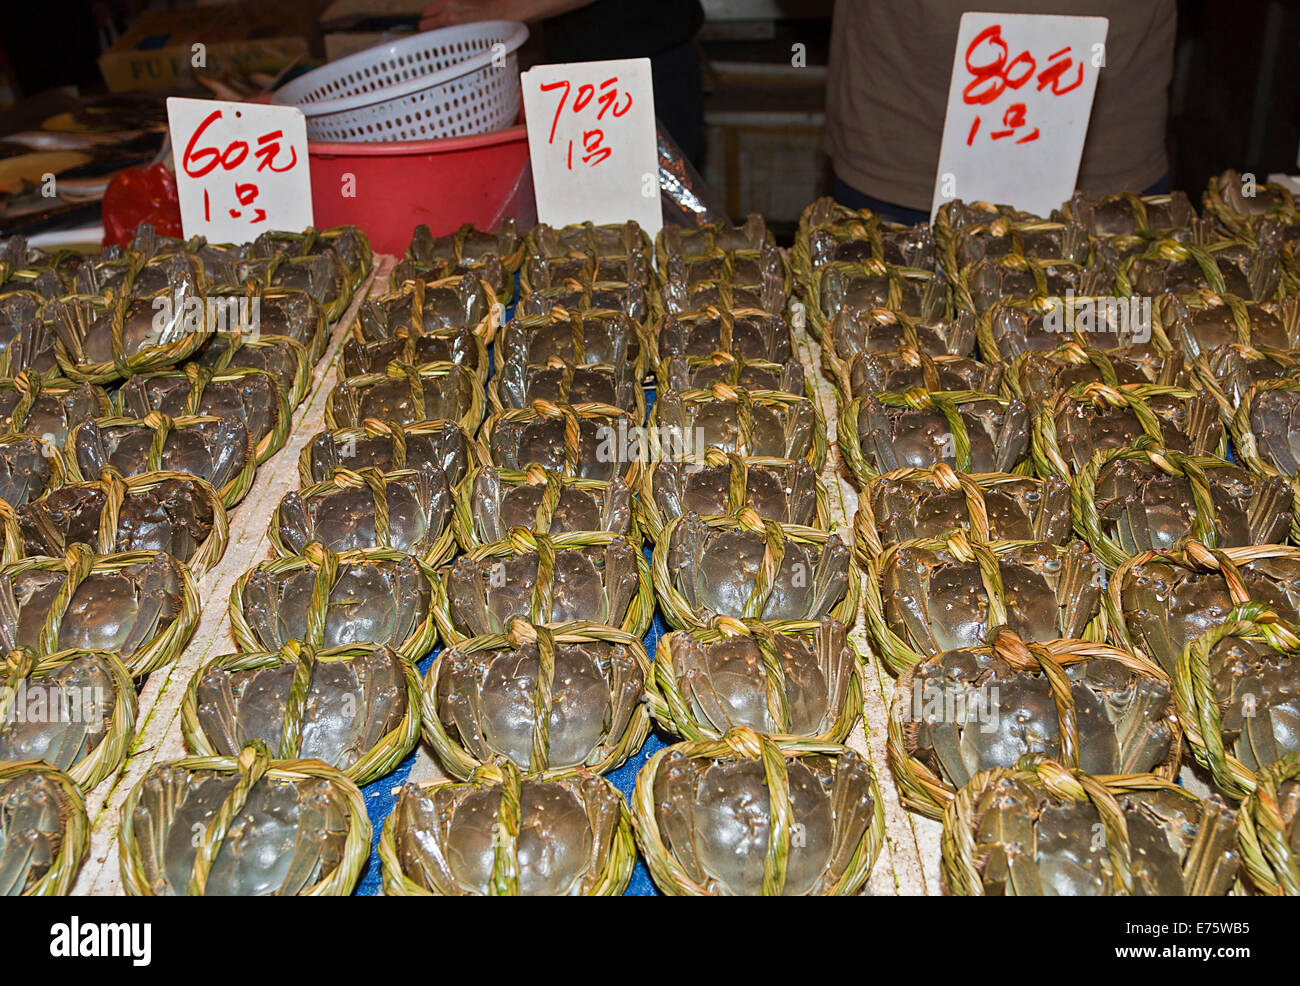 Fresh crabs for sale, tied up, Red Market, Macau, China Stock Photo